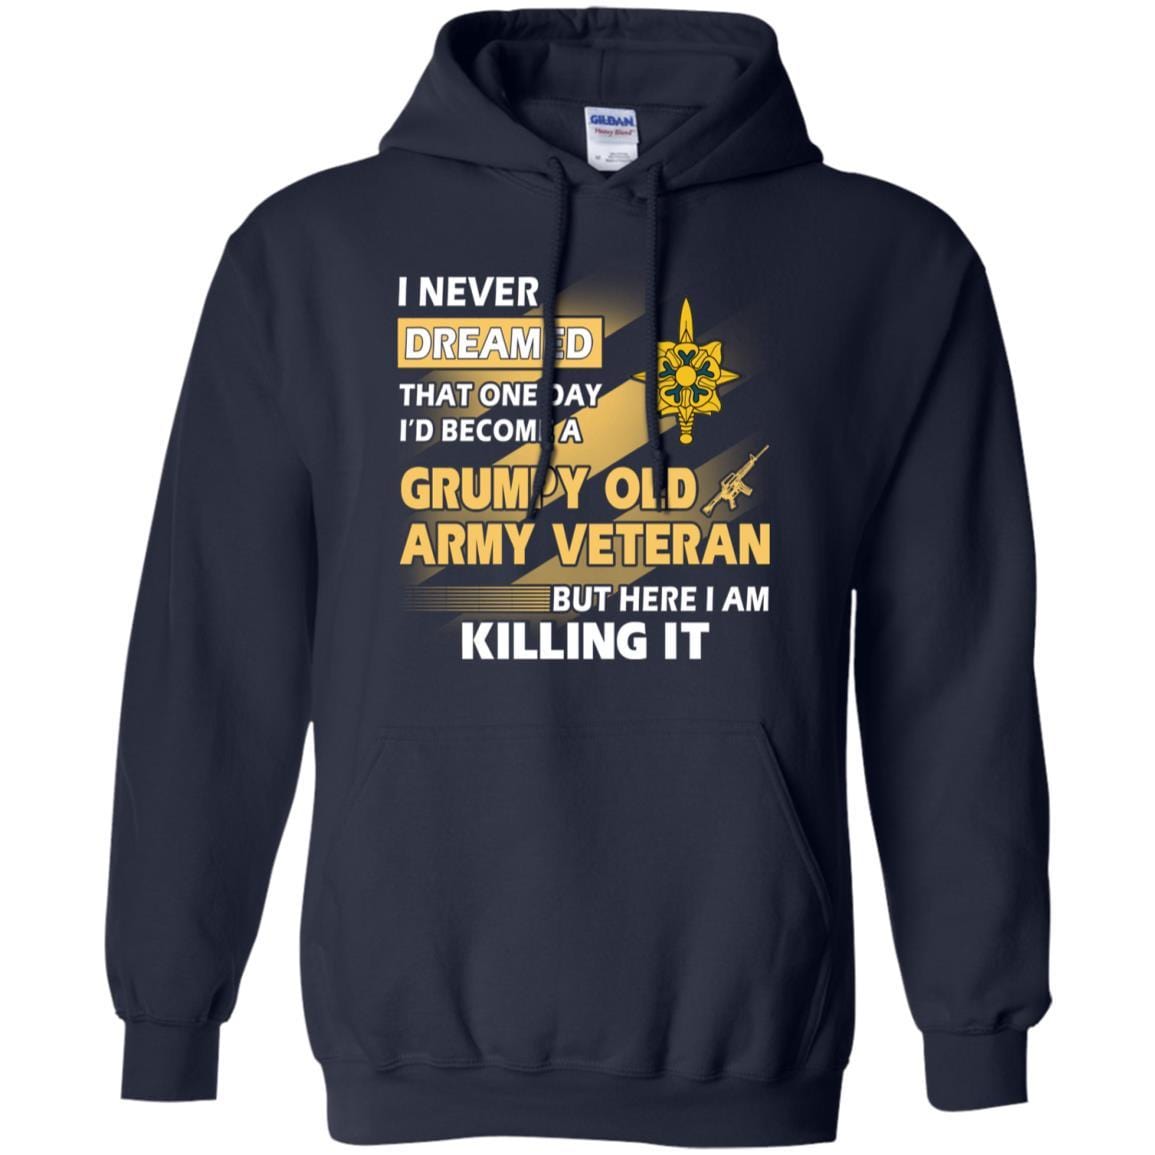 US Army T-Shirt "Military Intelligence Branch Grumpy Old Veteran" On Front-TShirt-Army-Veterans Nation